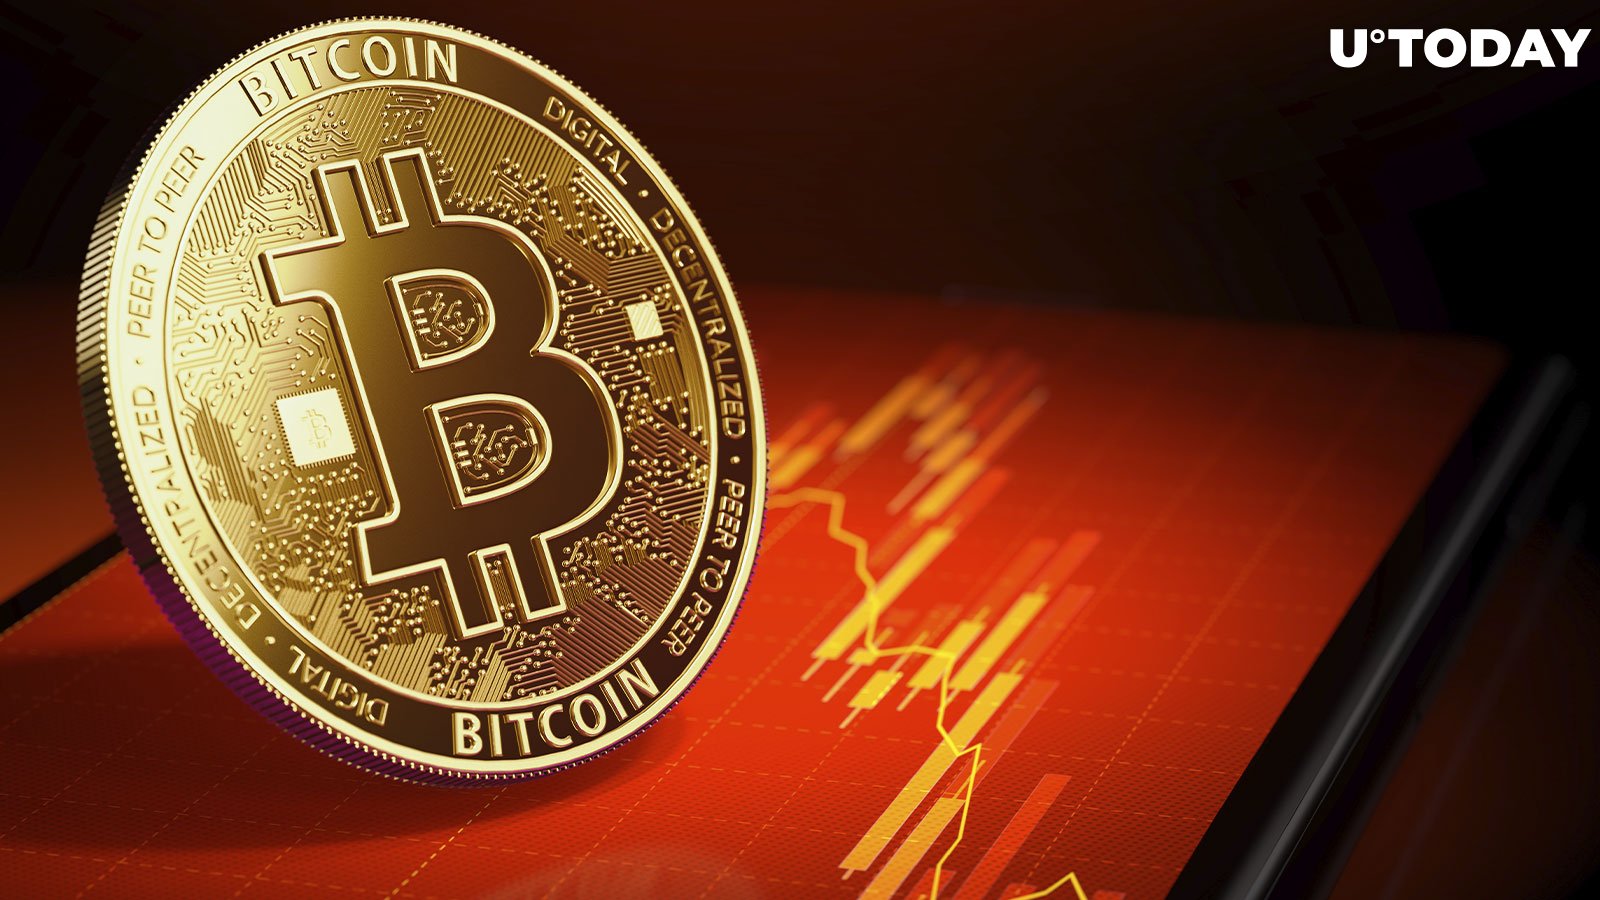 Bitcoin Drops to $16K, Reaching New Two-Year Low